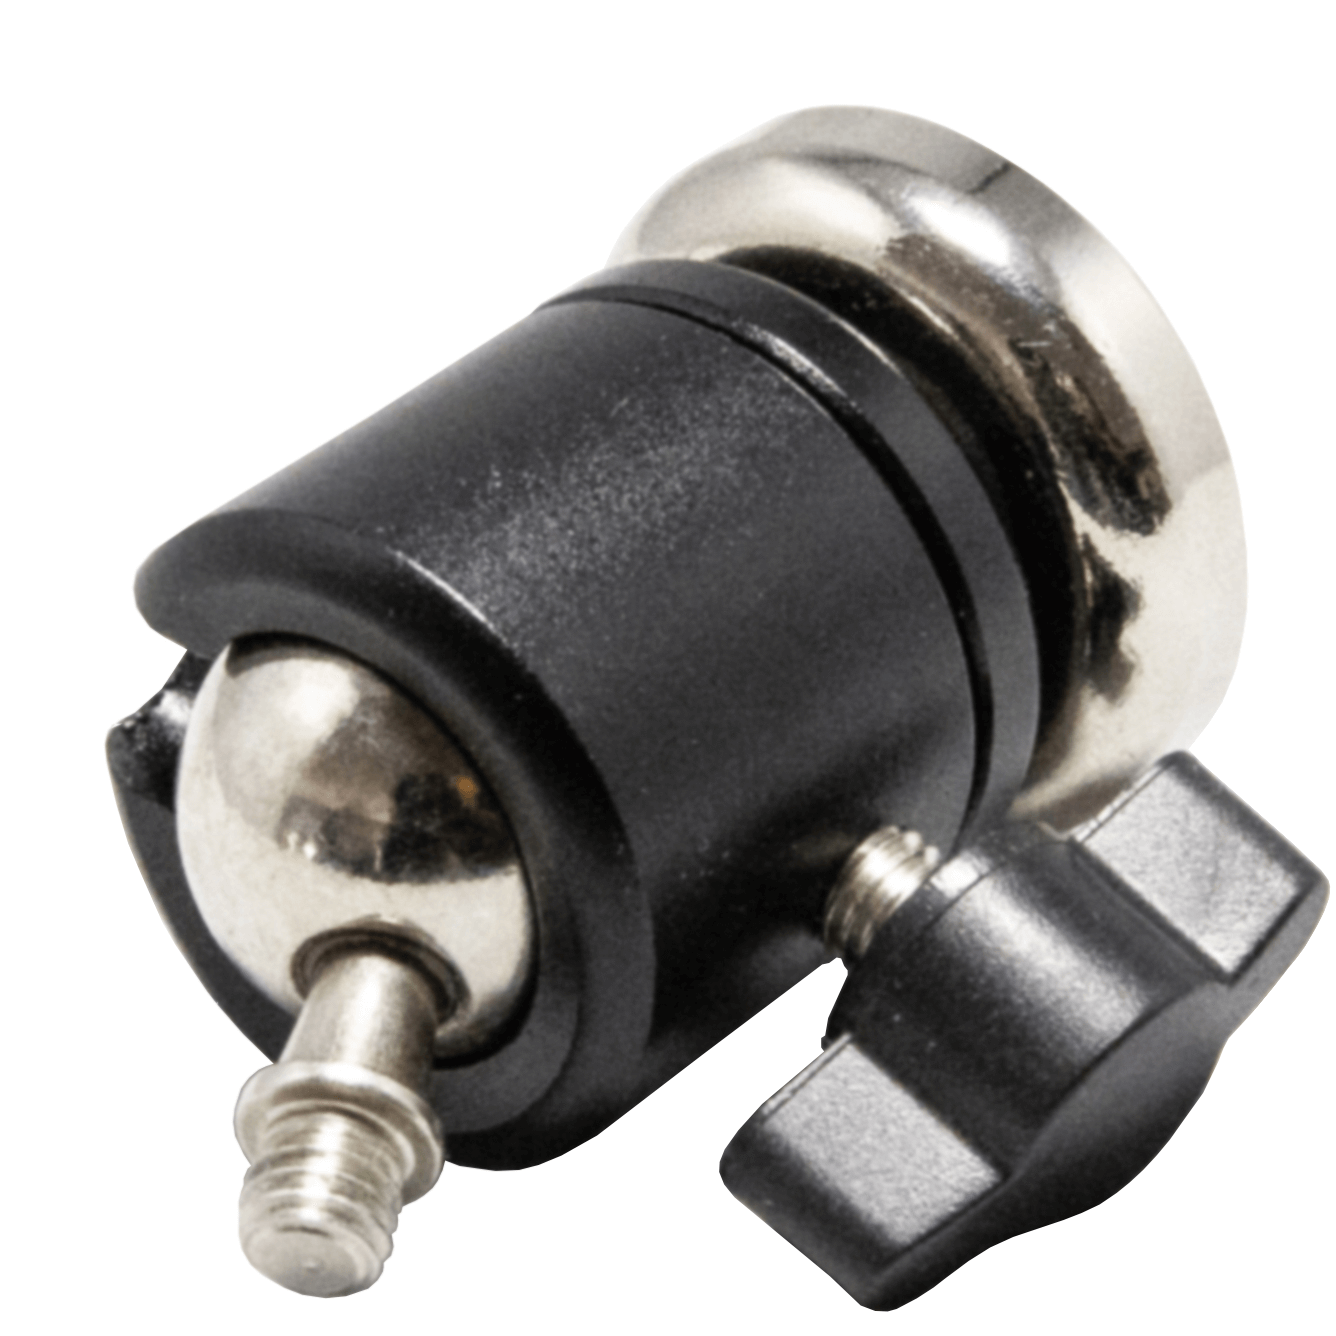 Ape Labs Swivel Ball Mount (Coin v1/2.0, Can SE/2.0)